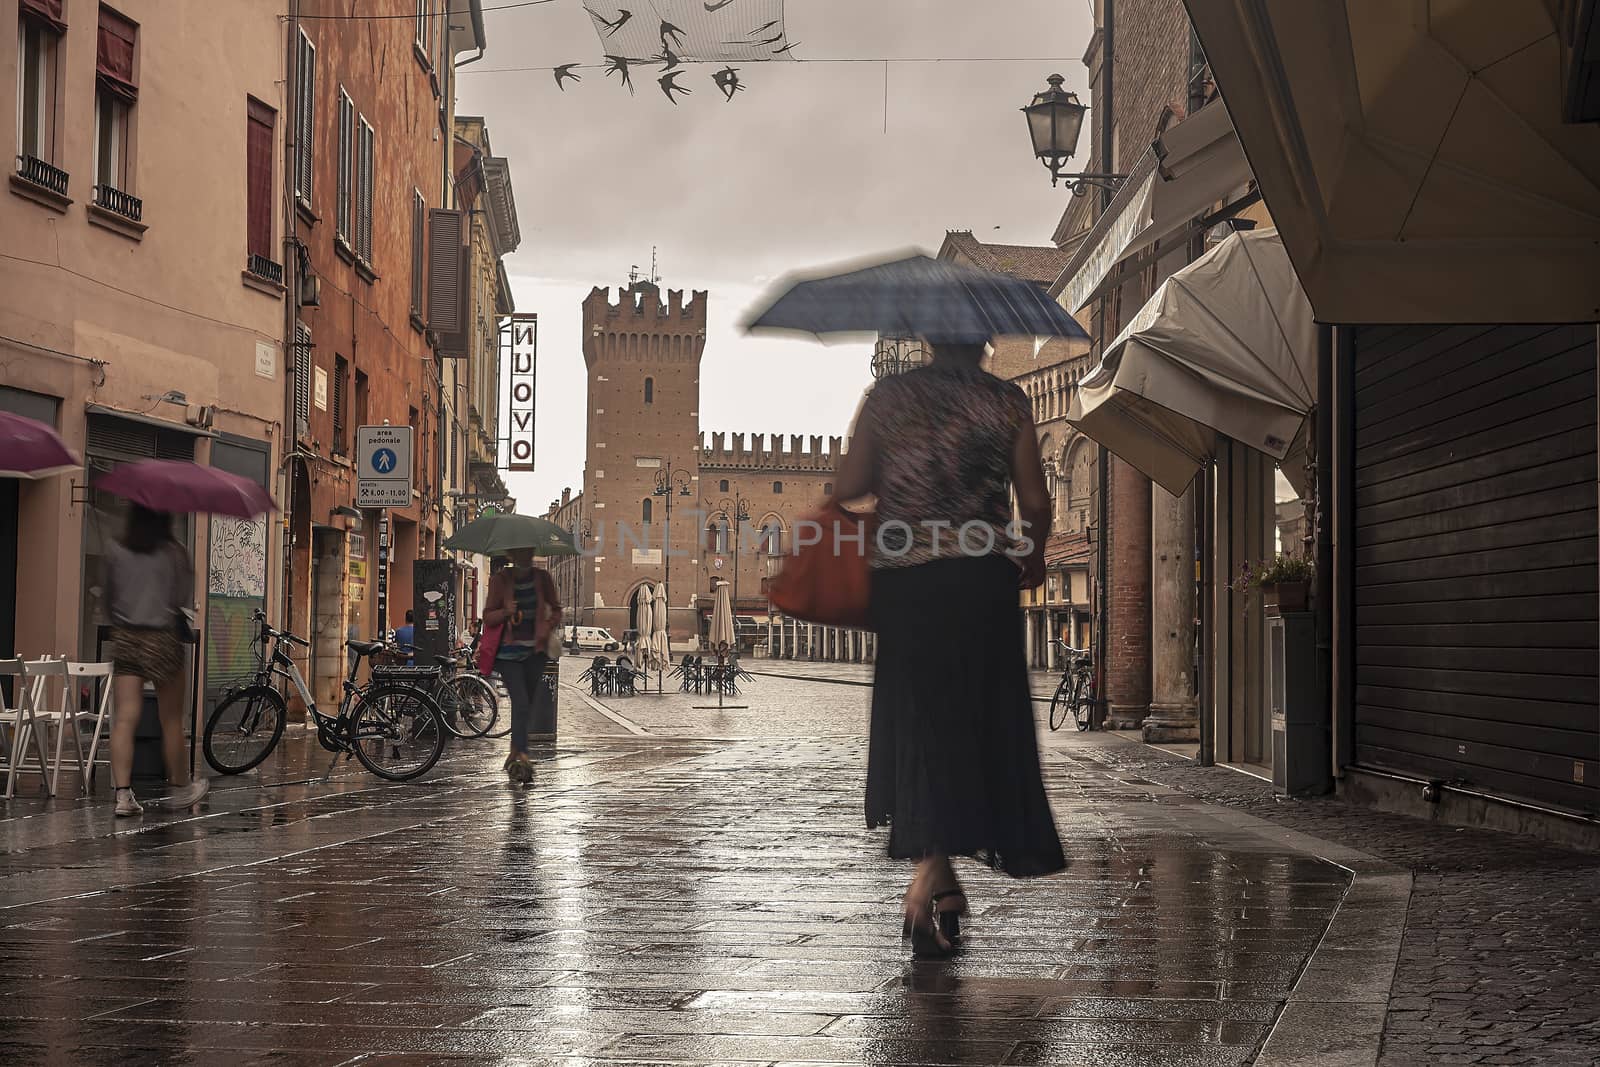 FERRARA, ITALY 29 JULY 2020 : Evocative view of the street that leads to Piazza Trento Trieste in Ferrara in Italy with people in their daily lives